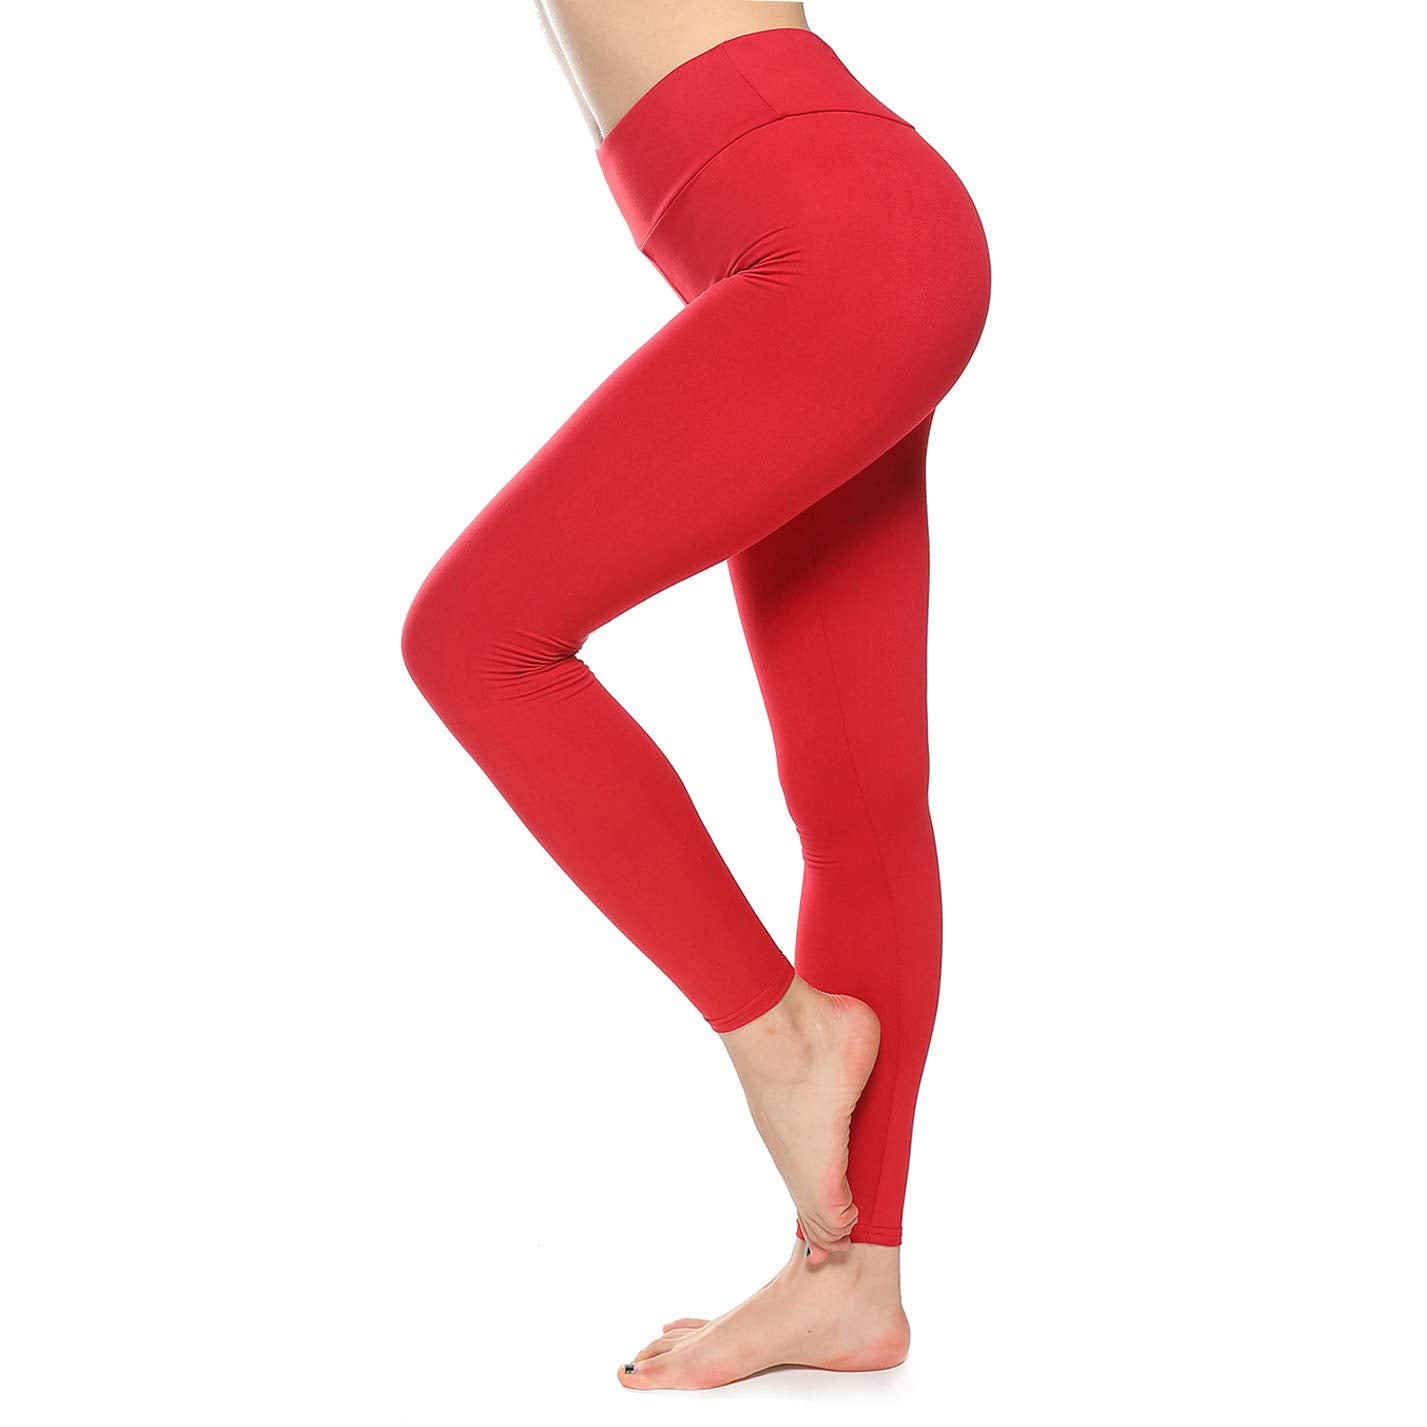 DEAL STACK - 3pk SINOPHANT High Waisted Leggings + 15% Coupon, £12.49 at